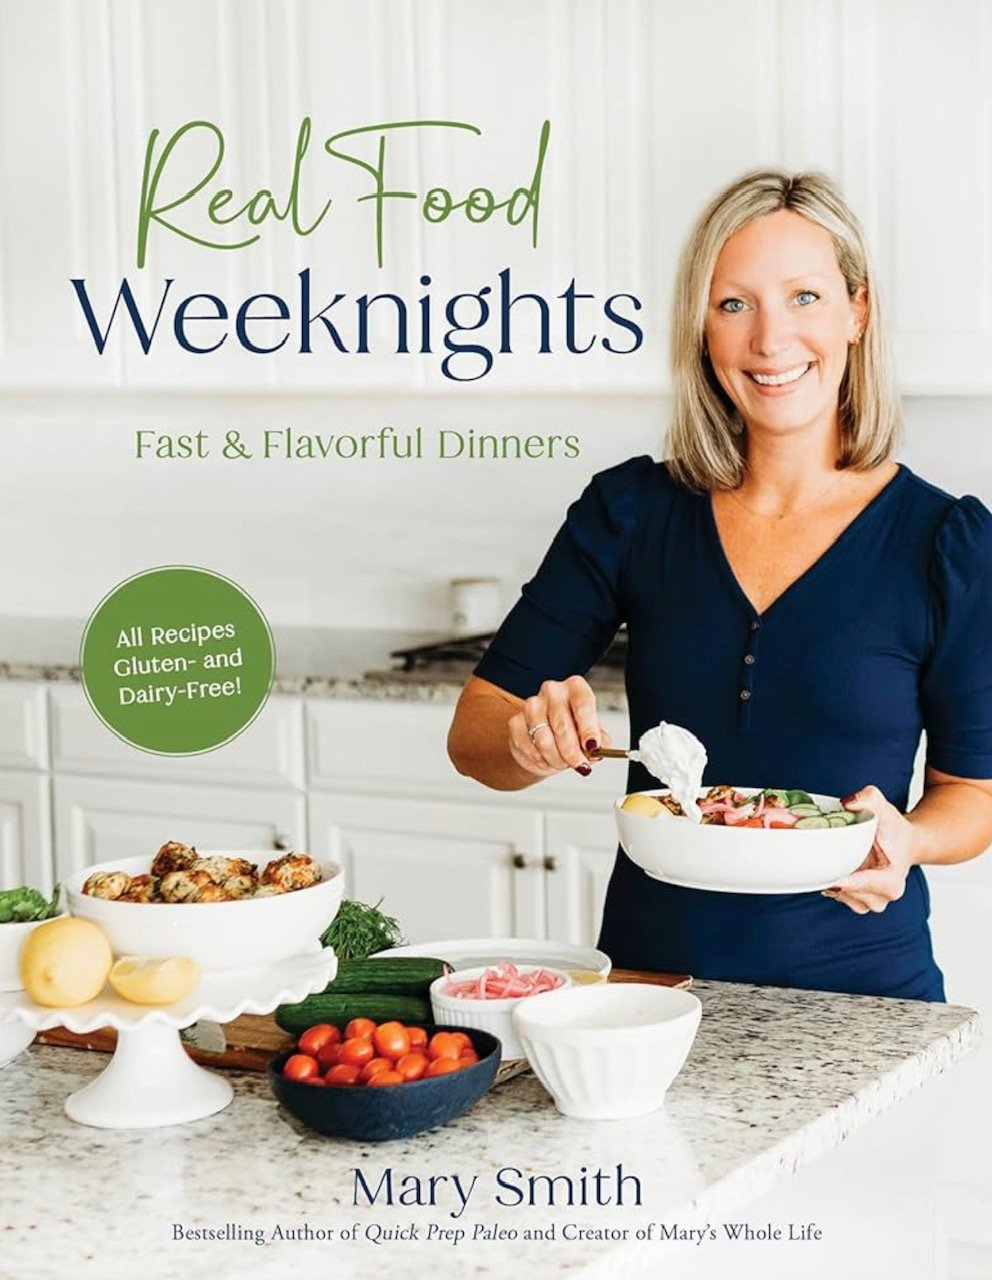 Mary Smith of Mary's Whole Life on the cover of Real Food Weeknights cookbook